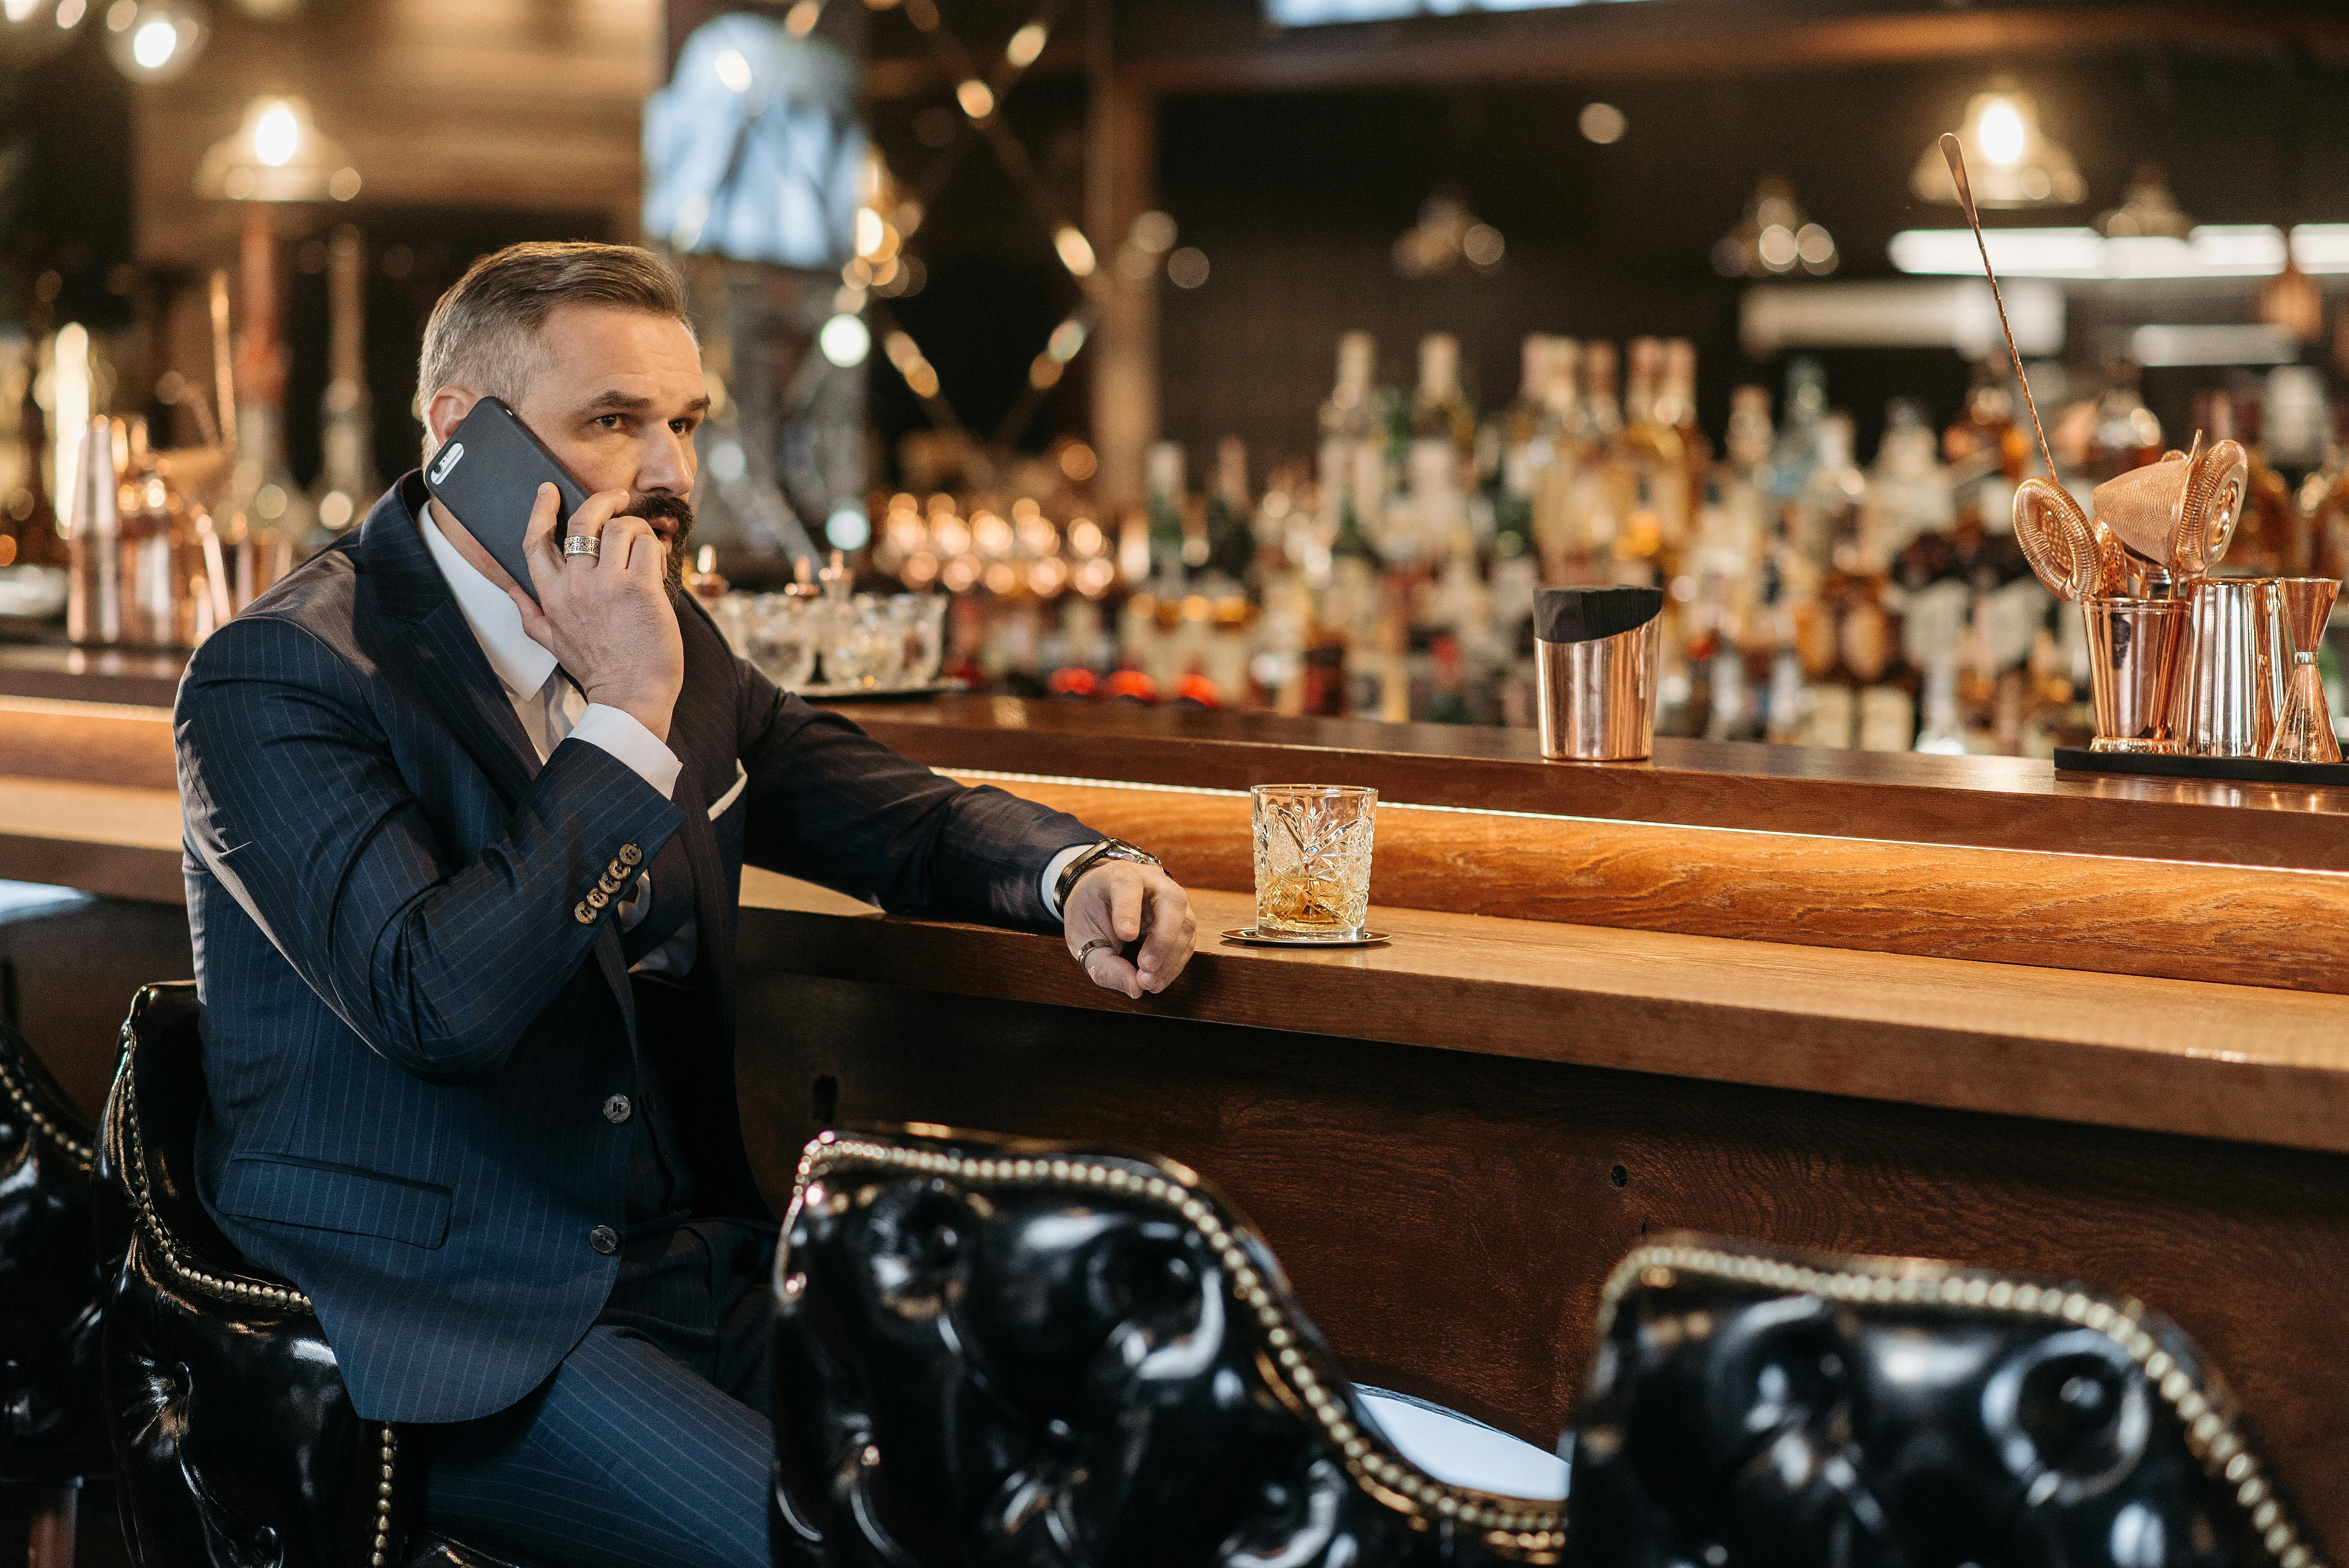 A man speaking on the phone while drinking at a bar | Source: Pexels